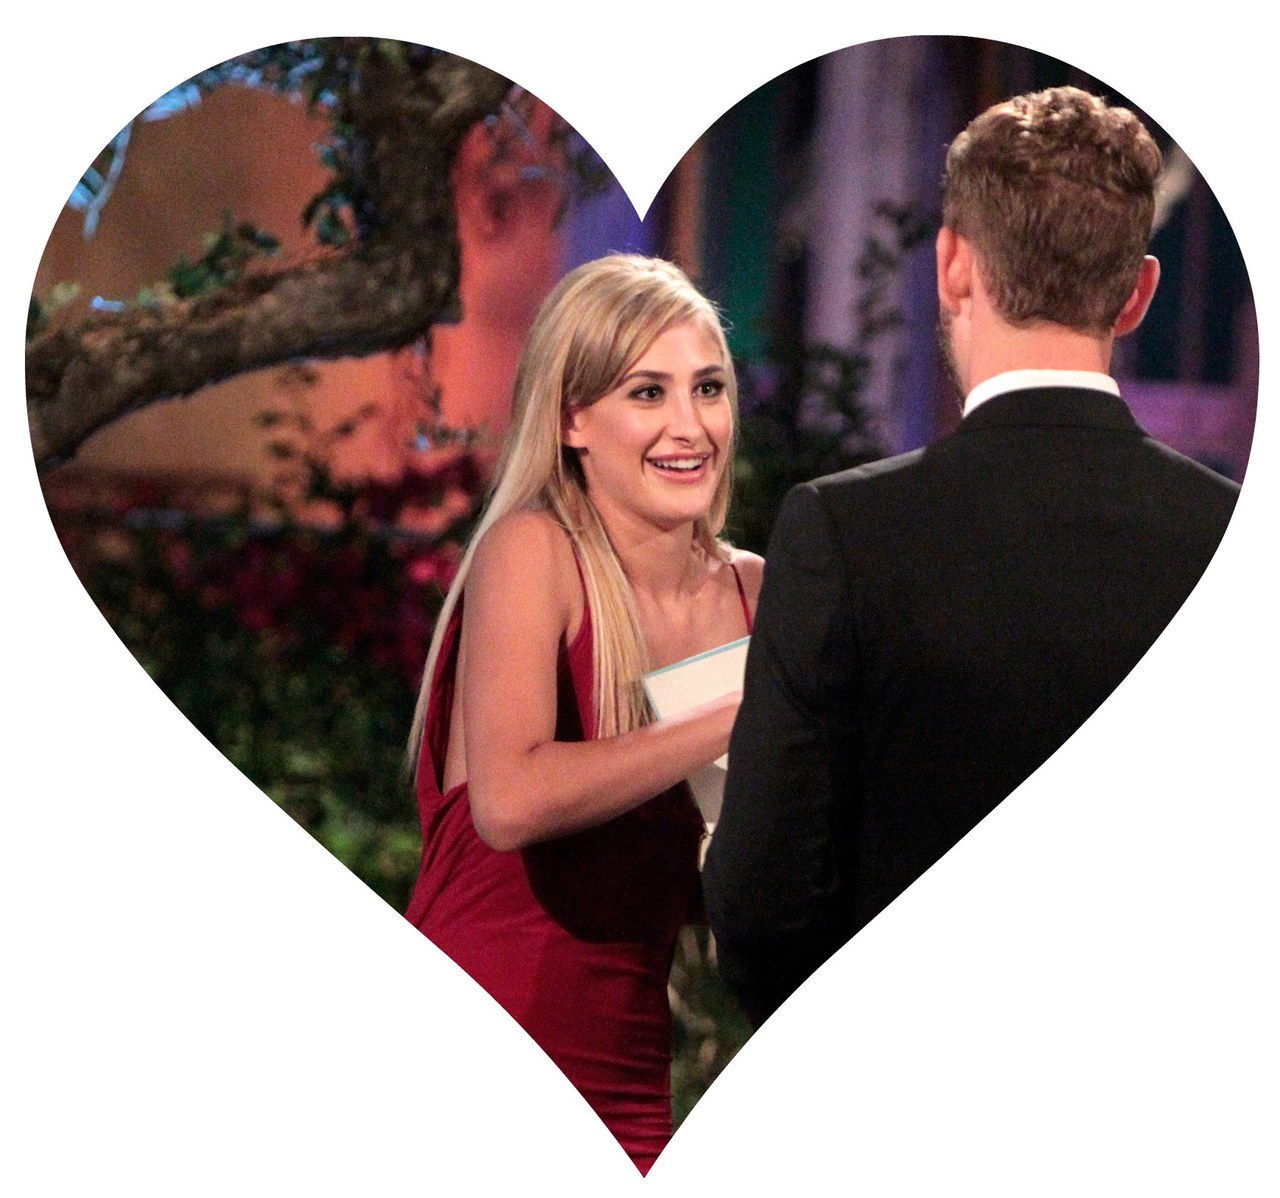 EL BACHELOR - “Episode 2101” - What do a dolphin-loving woman, a successful businesswoman who runs her parents multi-million -dollar flooring empire;, a bachelorette, who is hiding a big secret about her past involving Nick, and a no-nonsense Southern belle, who has Nick in her cross-hairs for a big country wedding, all have in common? They all have their sights set on making the Bachelor, Nick Viall, their future husband when the much-anticipated 21th edition of ABC's hit romance reality series, 